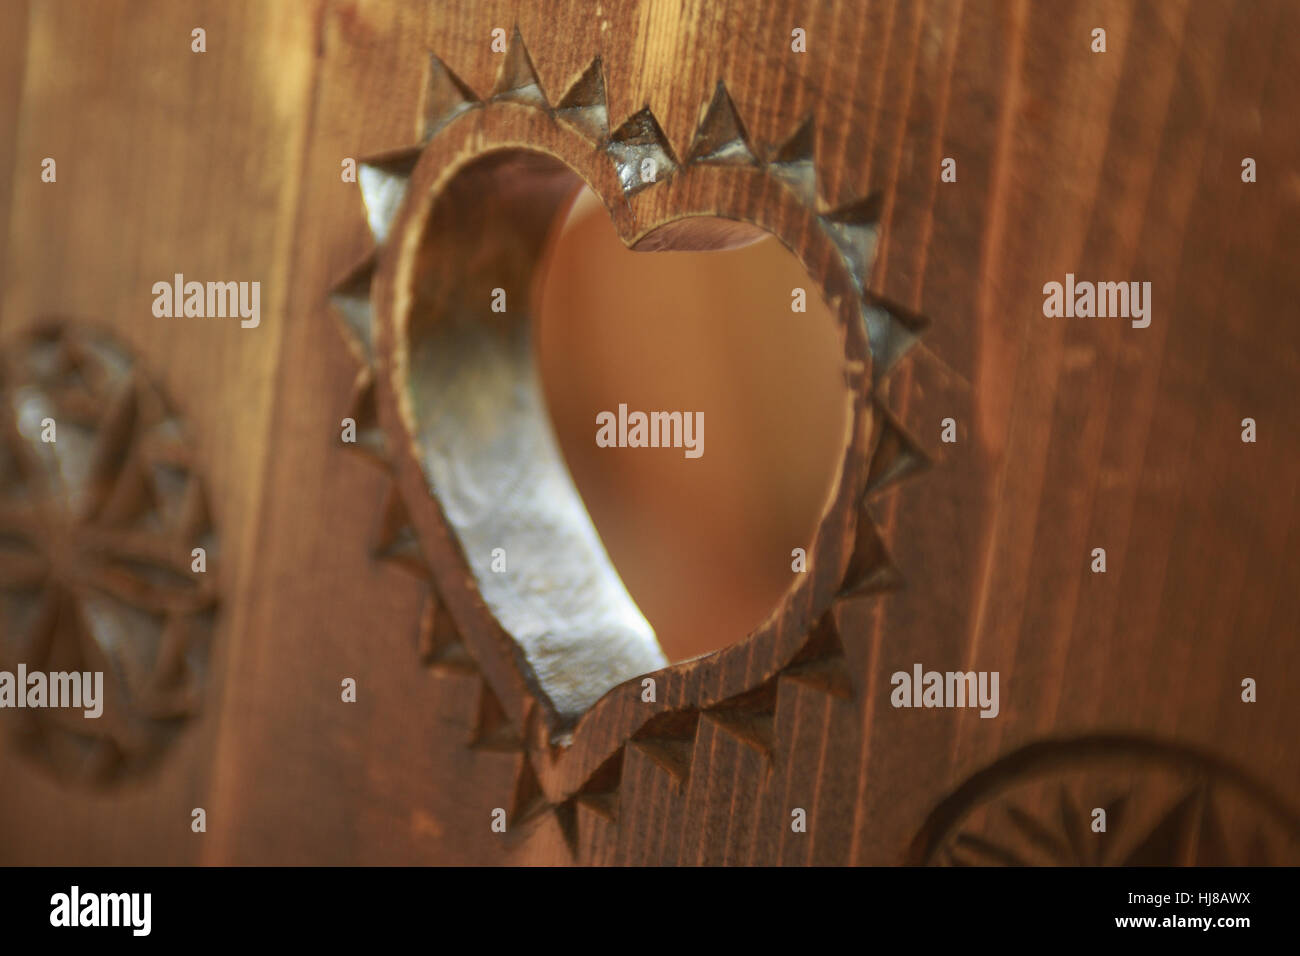 Heart in wooden chair Stock Photo